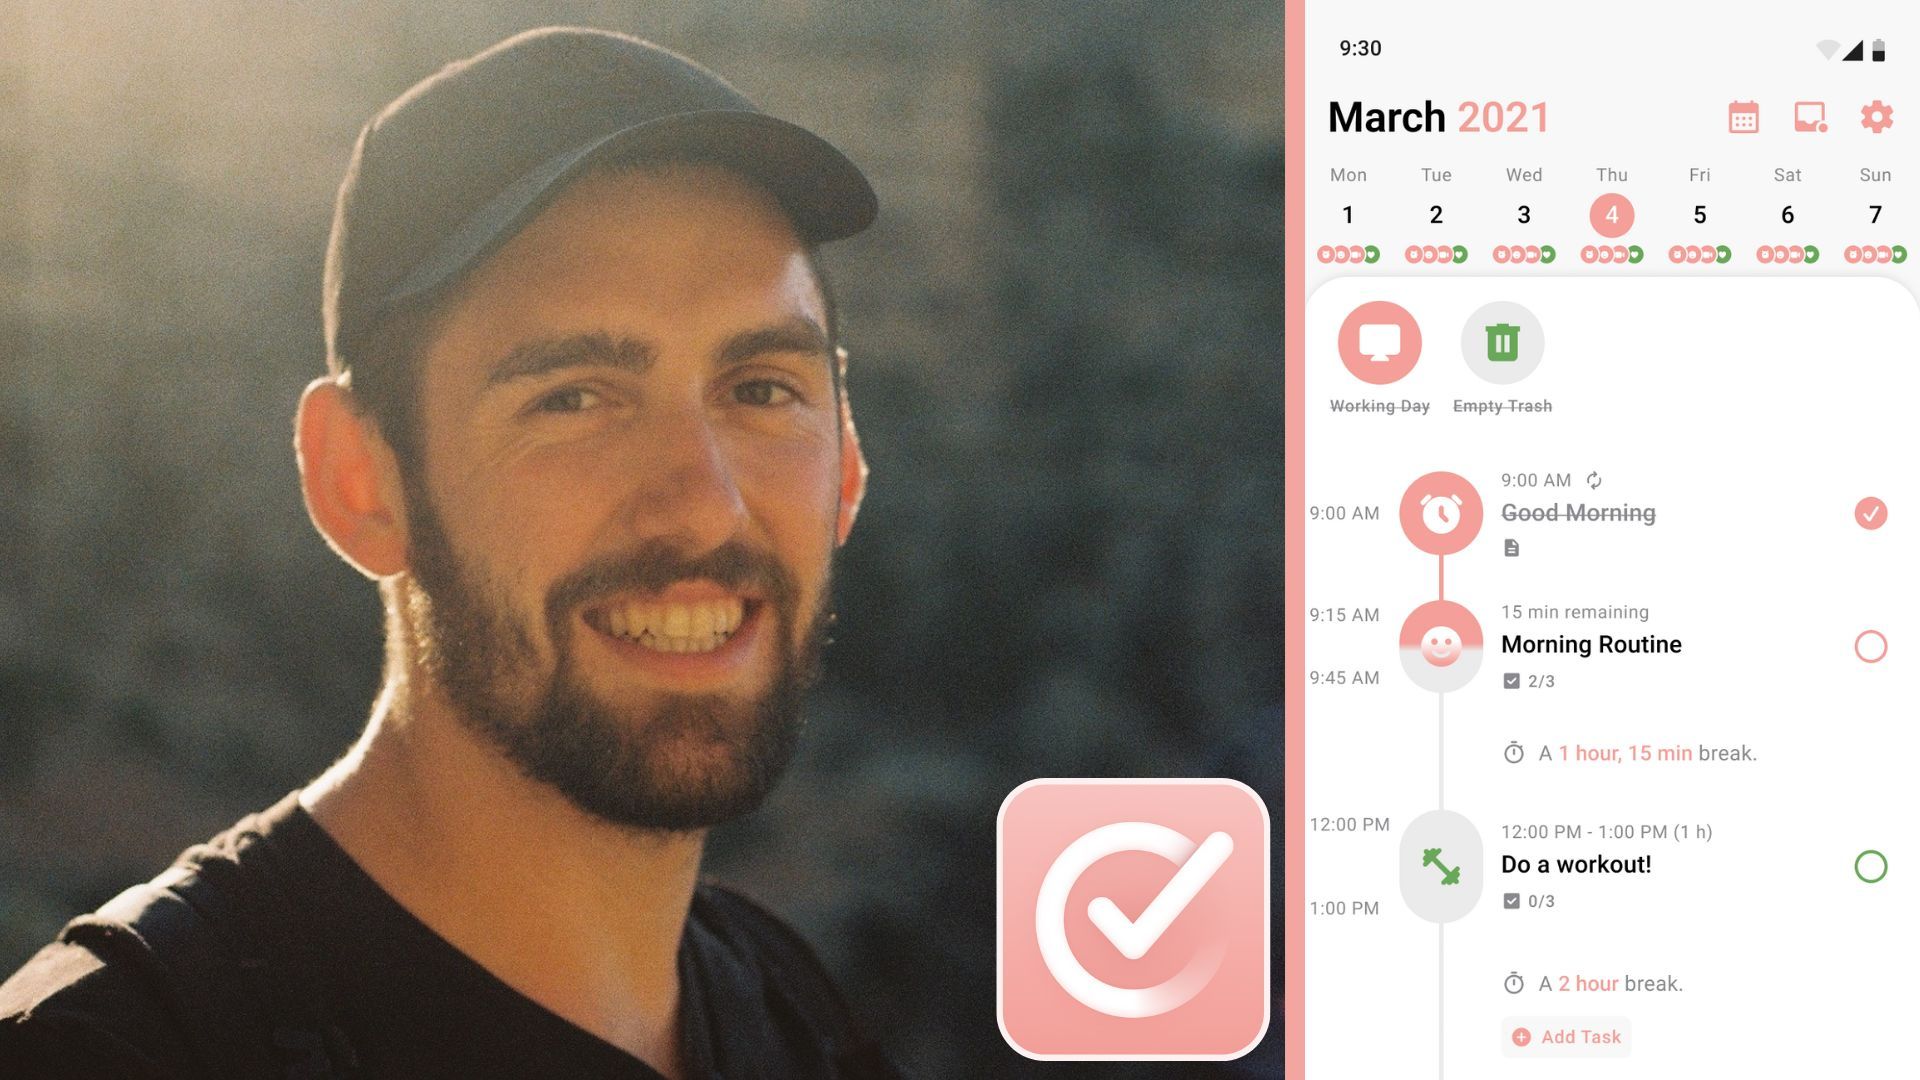 Picture of the founder of the Stuctured app, wearing a hat and smiling brightfully. Next to selfie is a screenshot from the app and the logo.